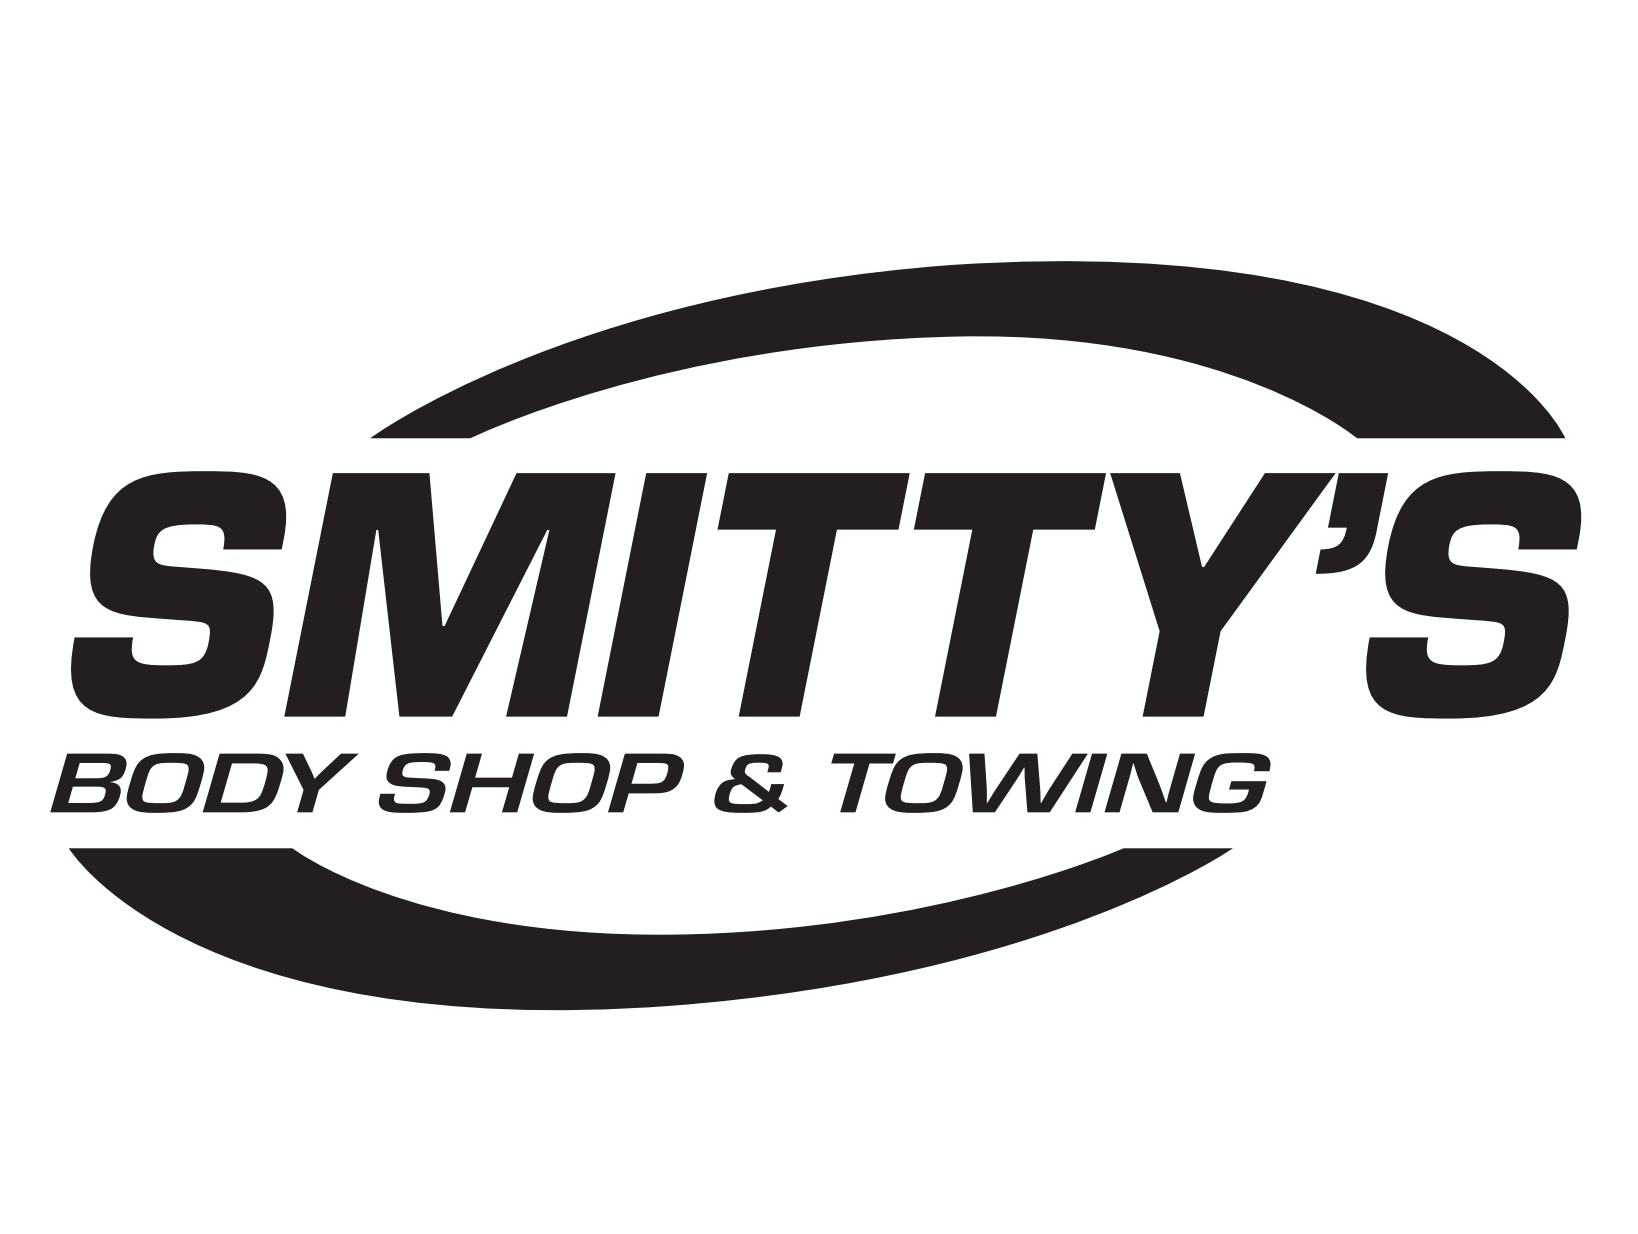 Smittys Body Shop.png